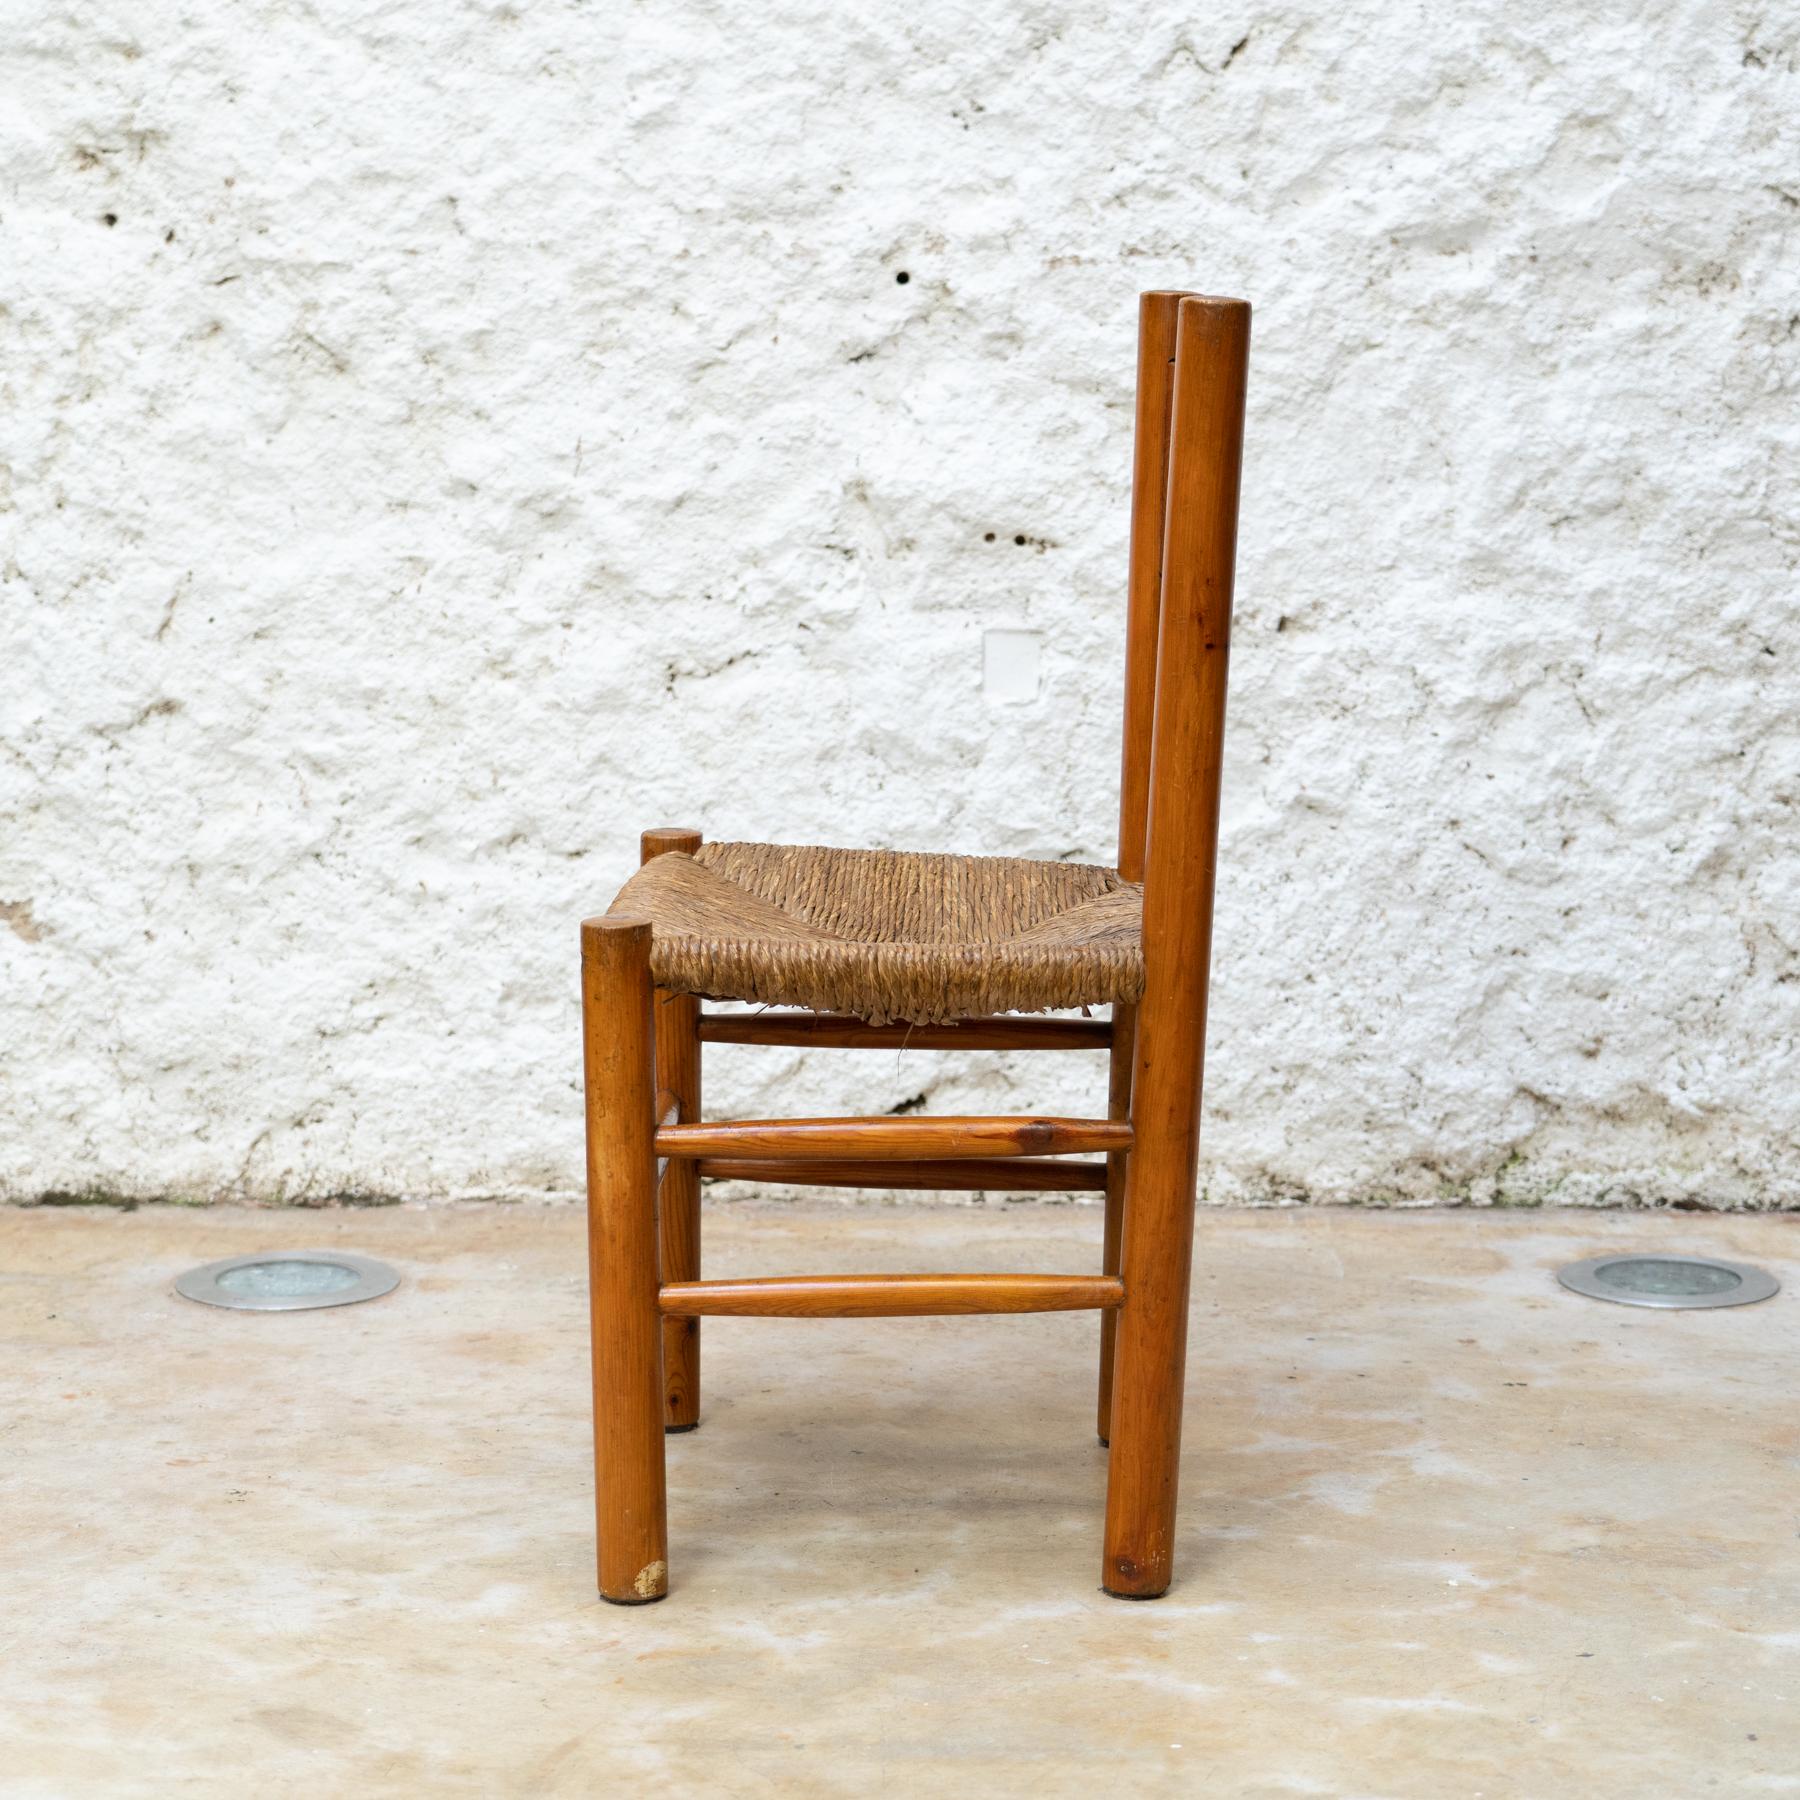 Wood and Rattan Mid Century Modern Chair After Charlotte Perriand, circa 1960 For Sale 1